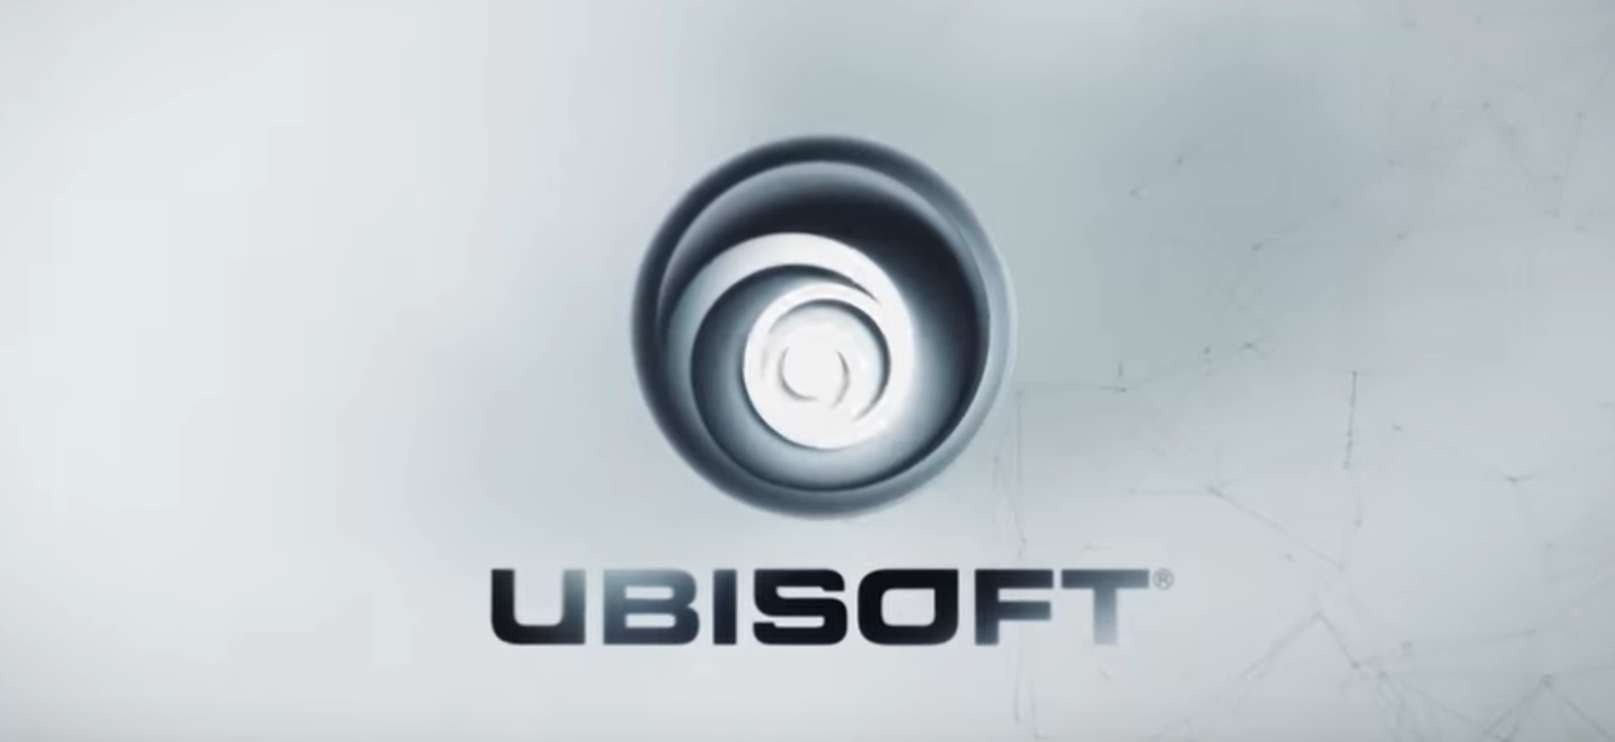 Survey Finds That 20% Of Ubisoft Employees Do Not Feel Respected Or Safe In The Workplace